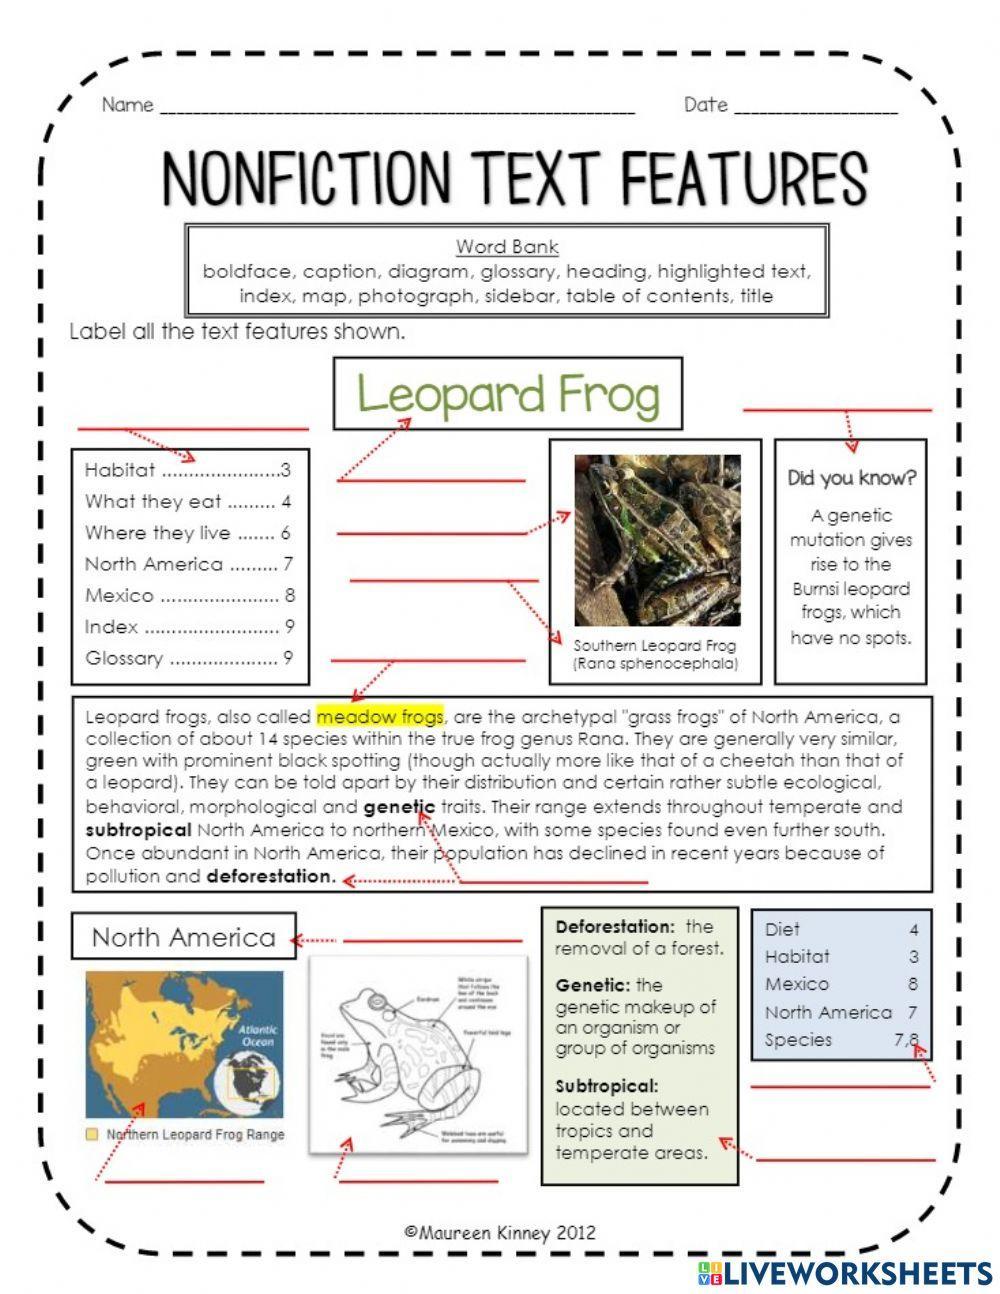 Text and Graphic Features